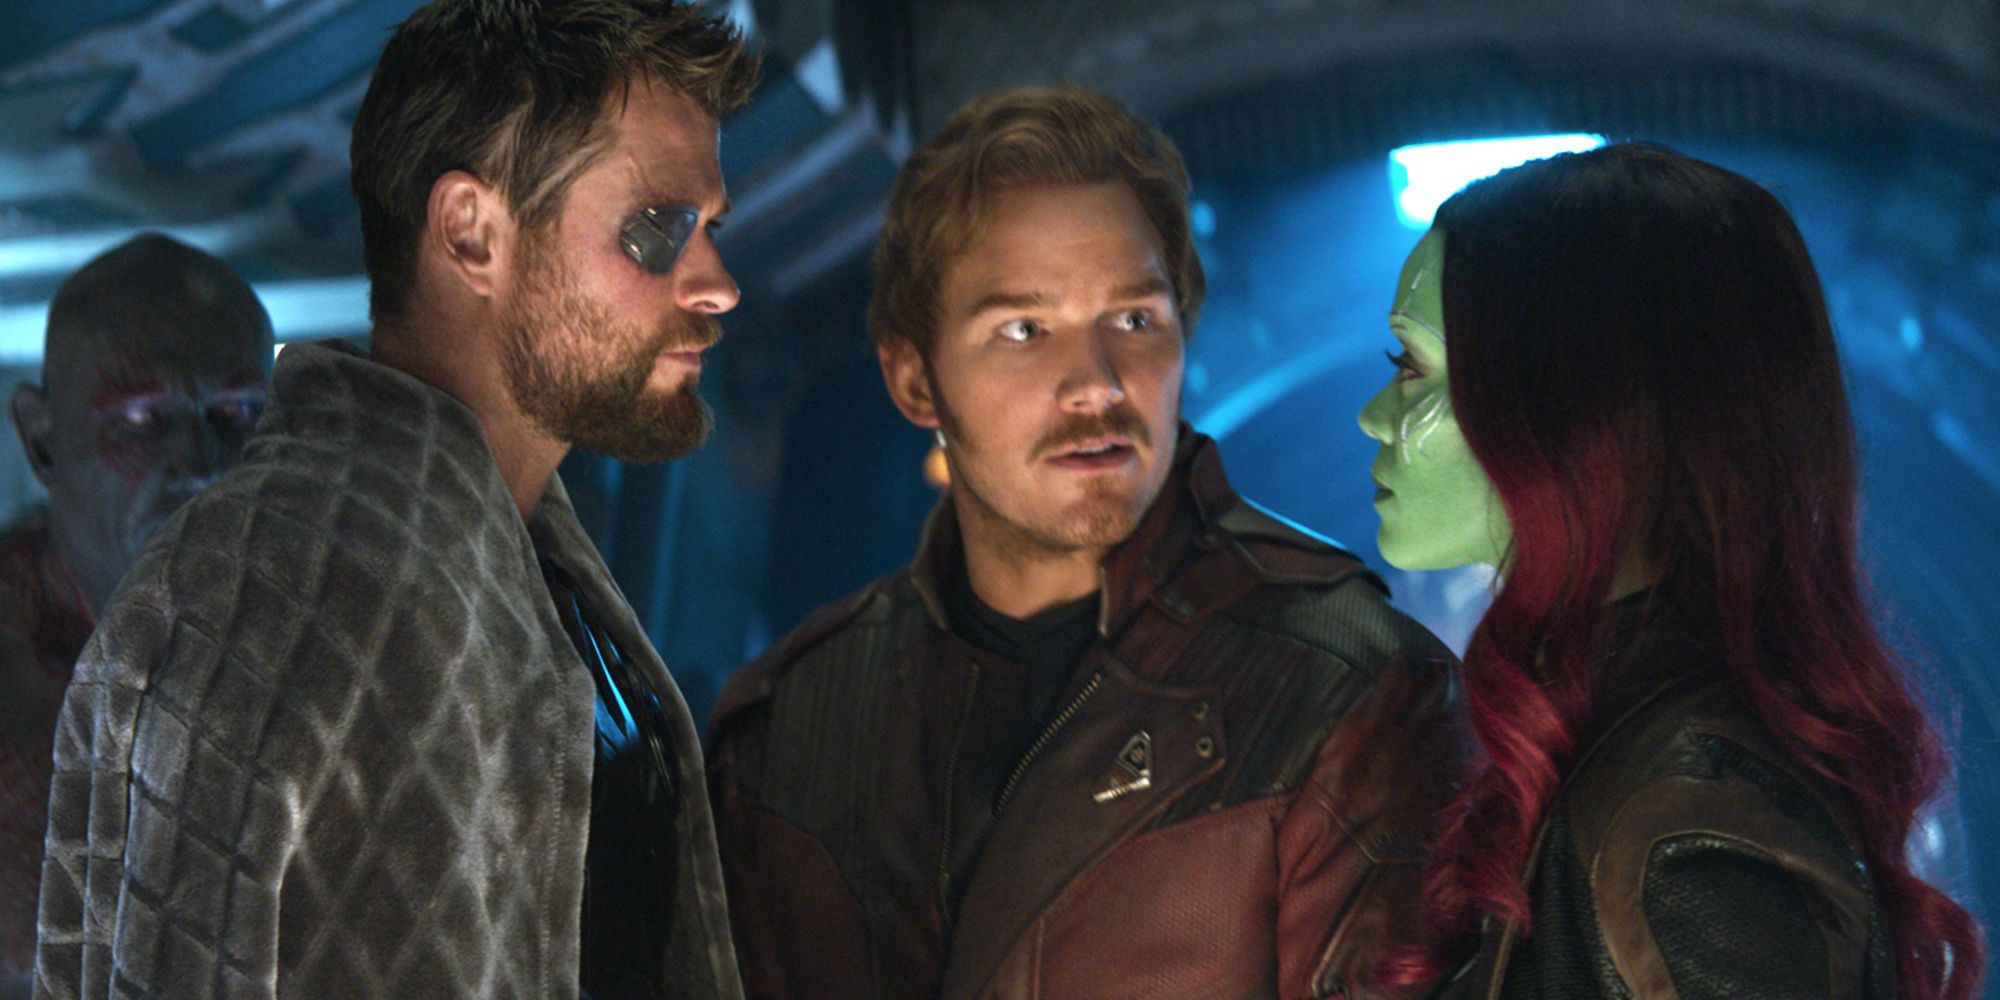 Avengers Infinity War - Thor, Peter Quill, and Gamora talking